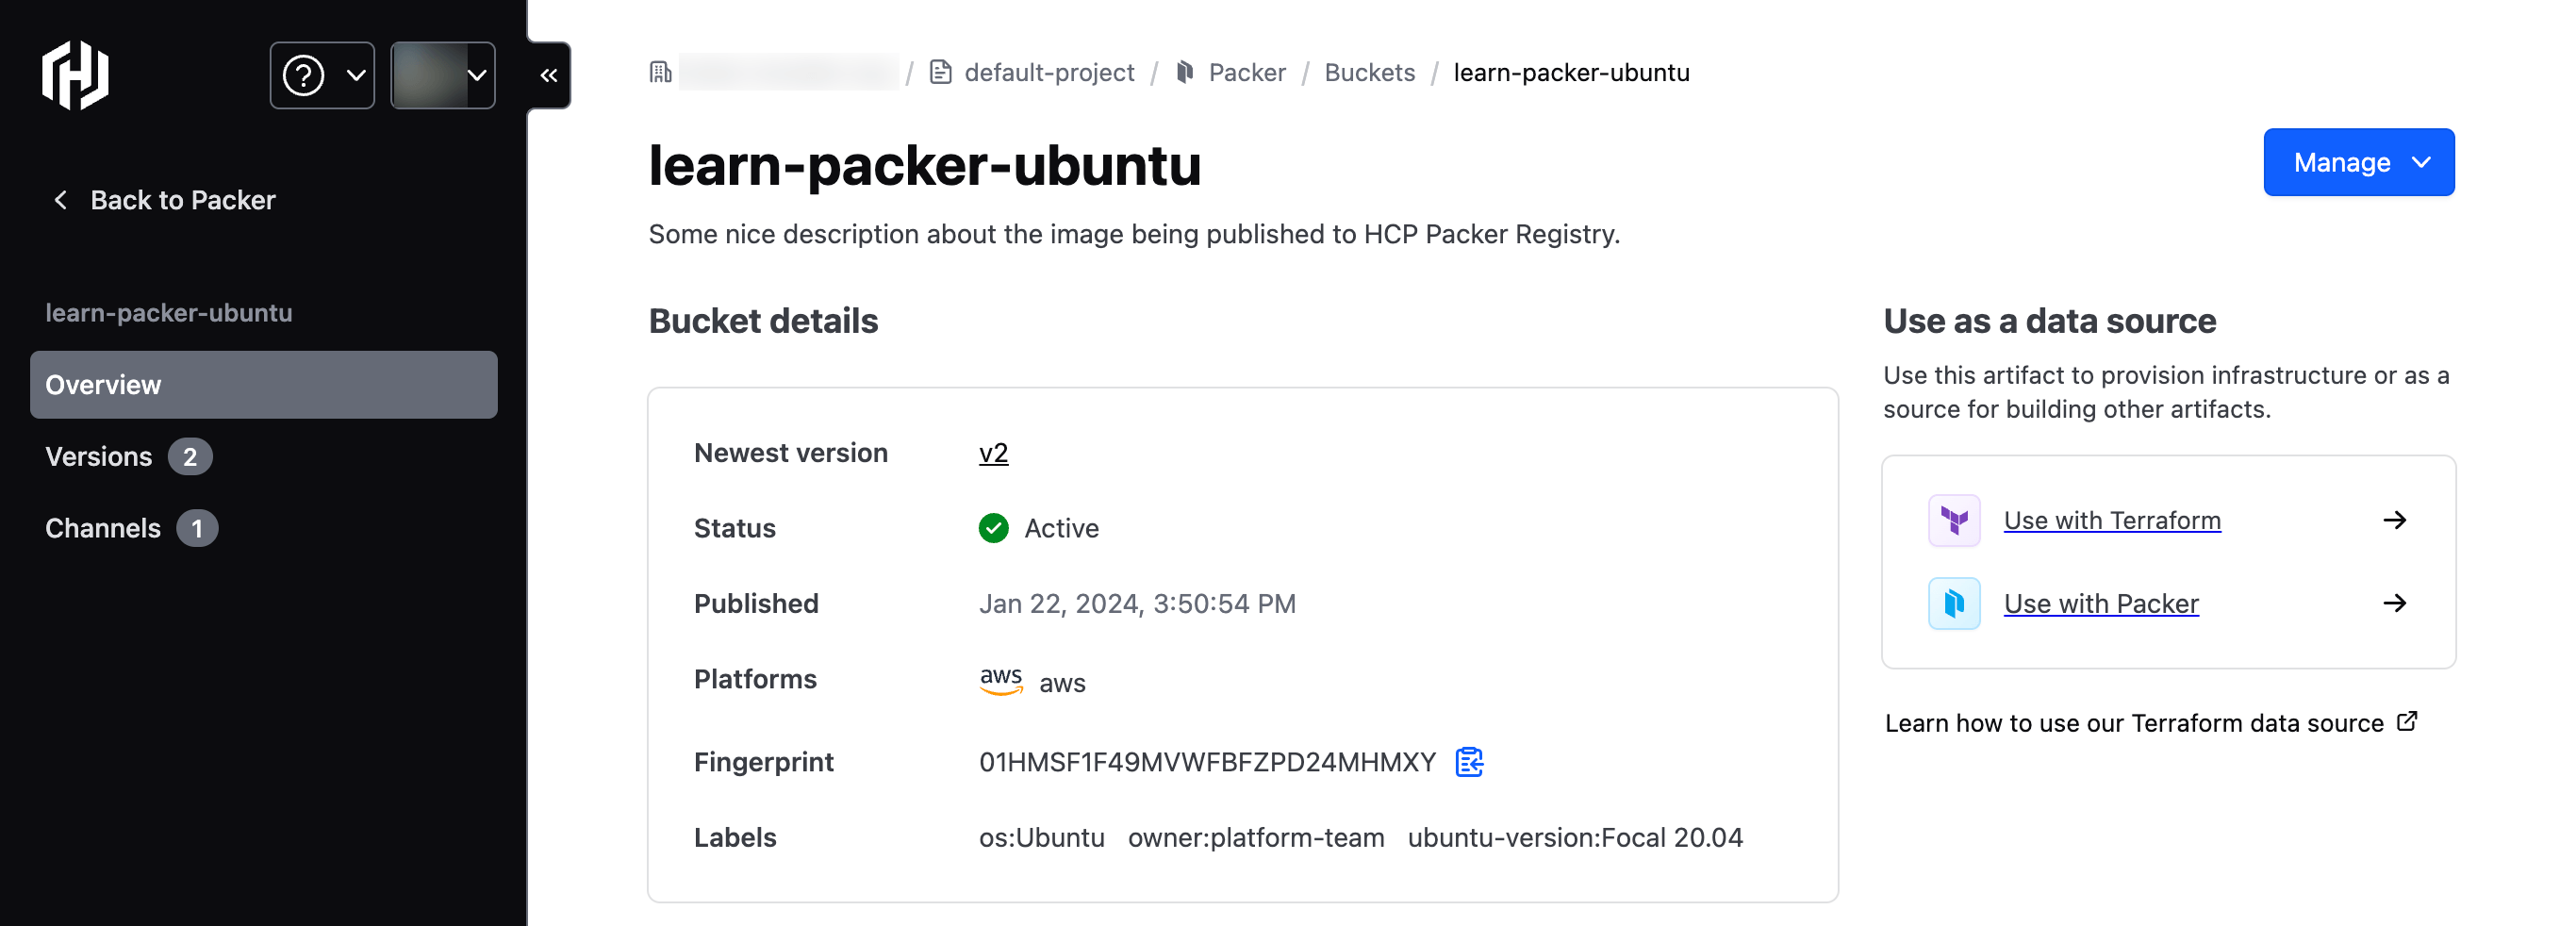 Main page for learn-packer-ubuntu bucket. This page will show two versions for the artifact.